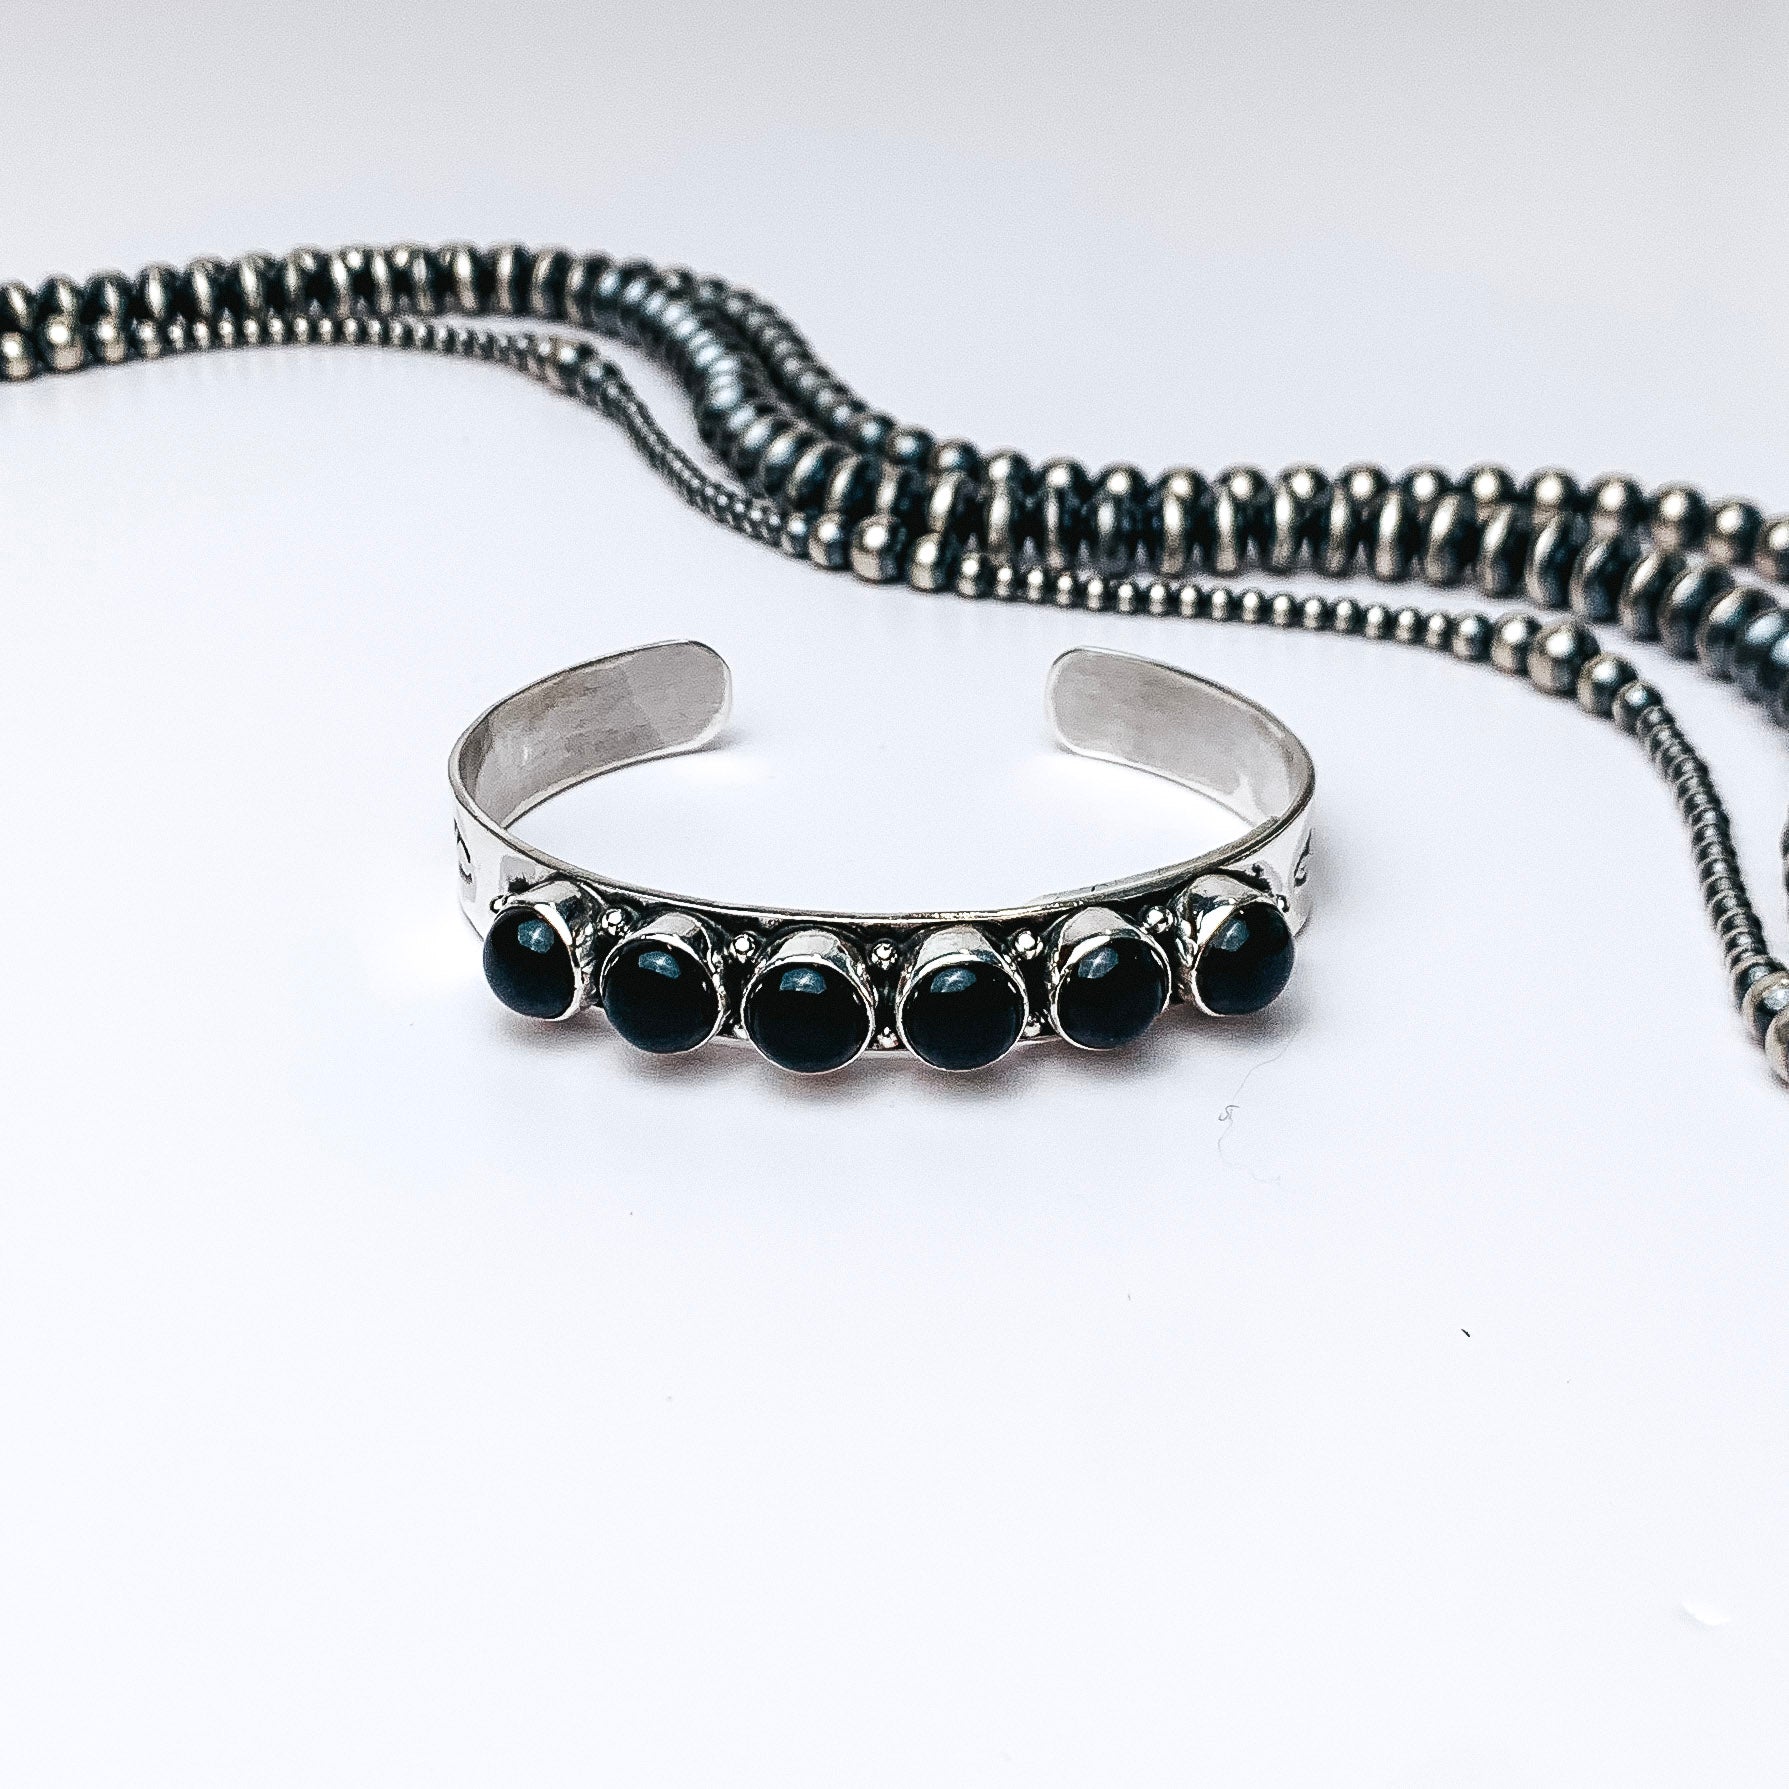 Centered in the picture is a cuff with six black onyx stones. Navajo pearls are laid above the cuff, all on a white background.